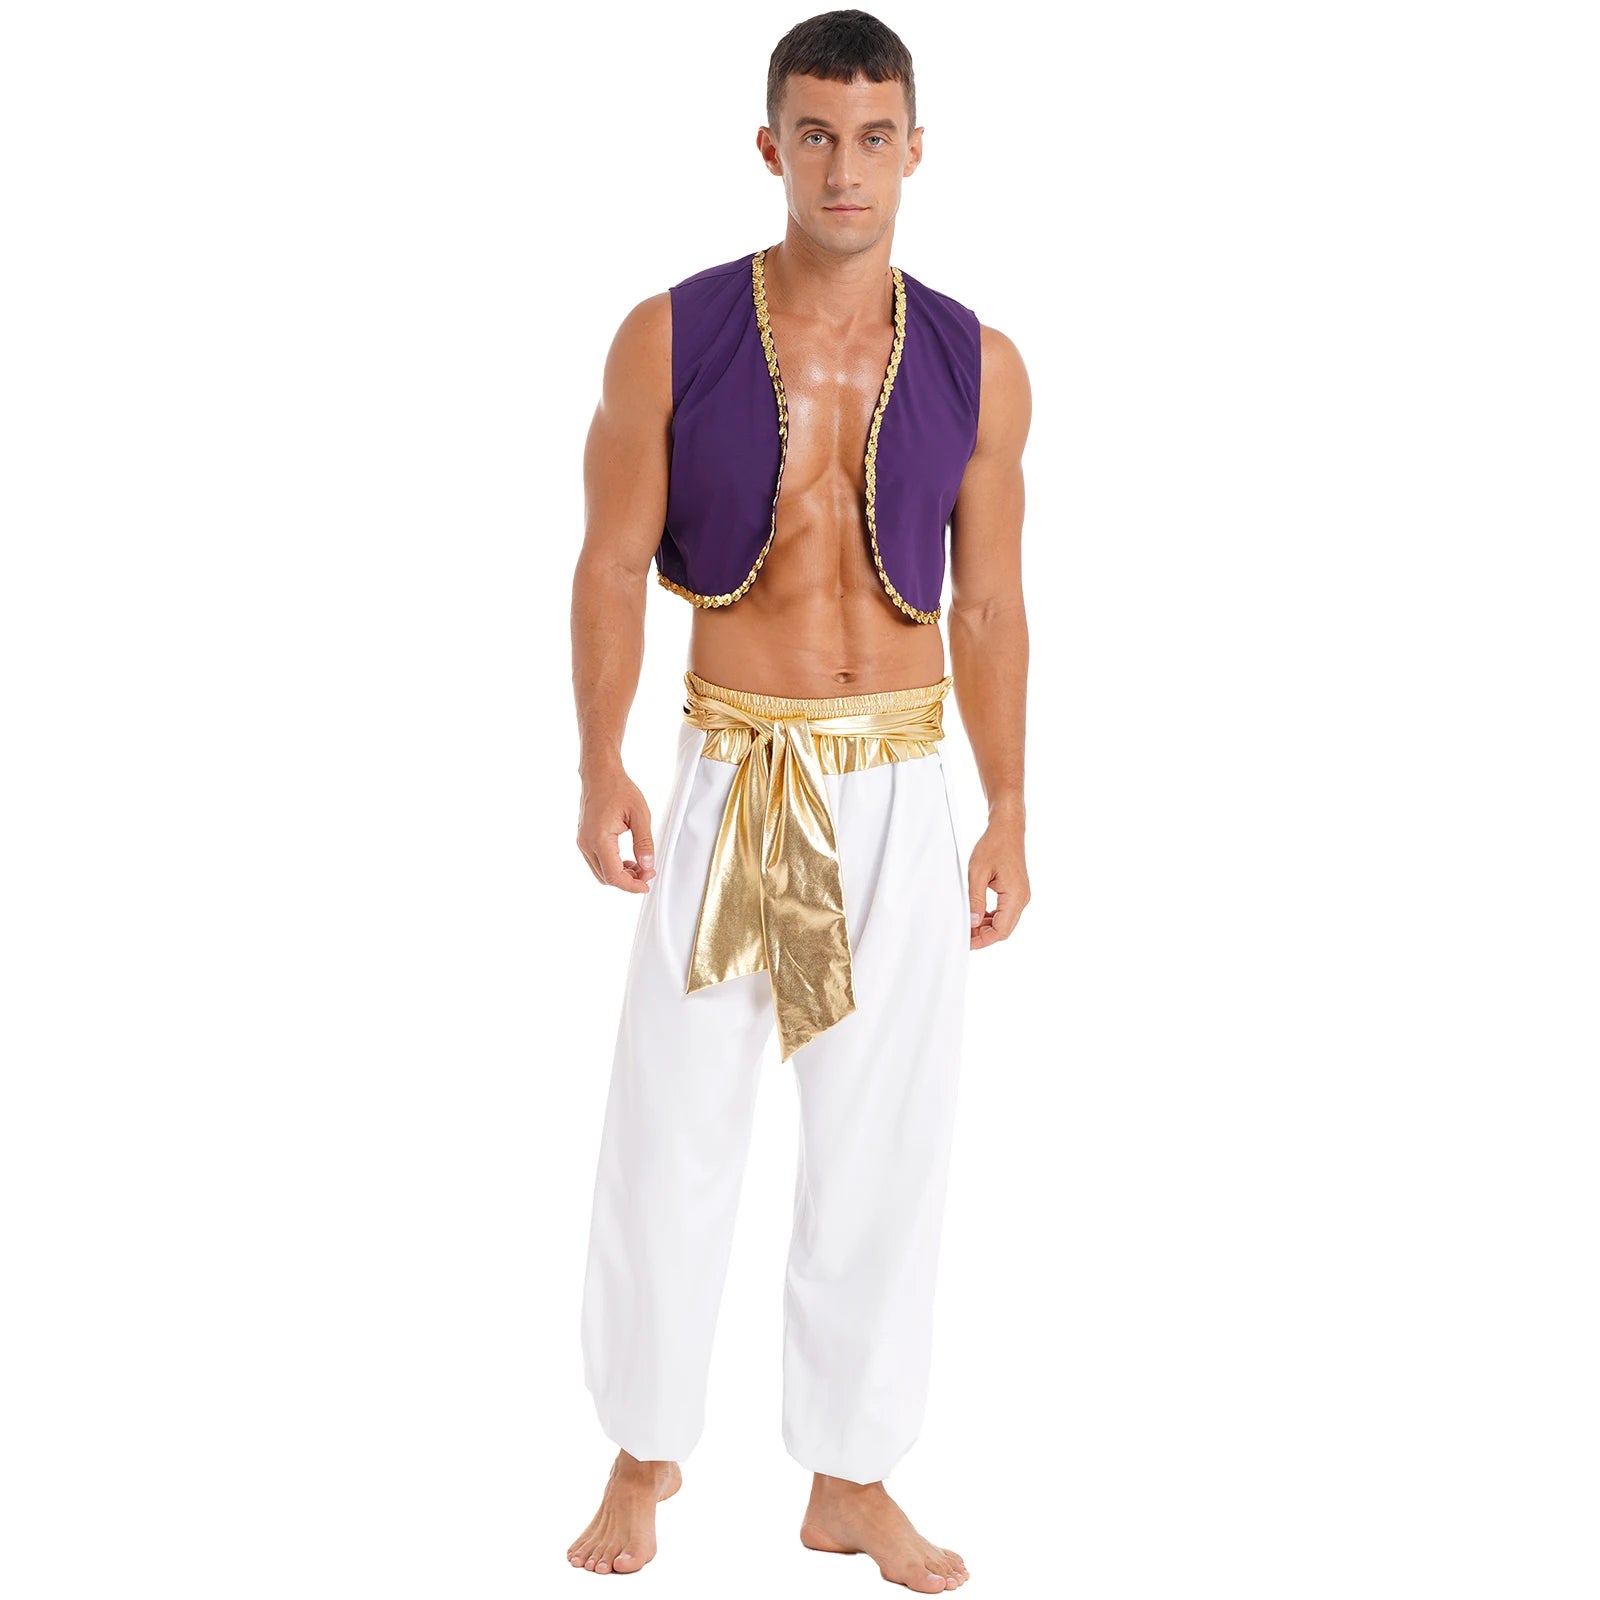 Mens Halloween Arabian Prince Costume Mythical Aladin Party Cosplay Fancy Dress Outfit Sequin Trim Waistcoat with Belted Pants